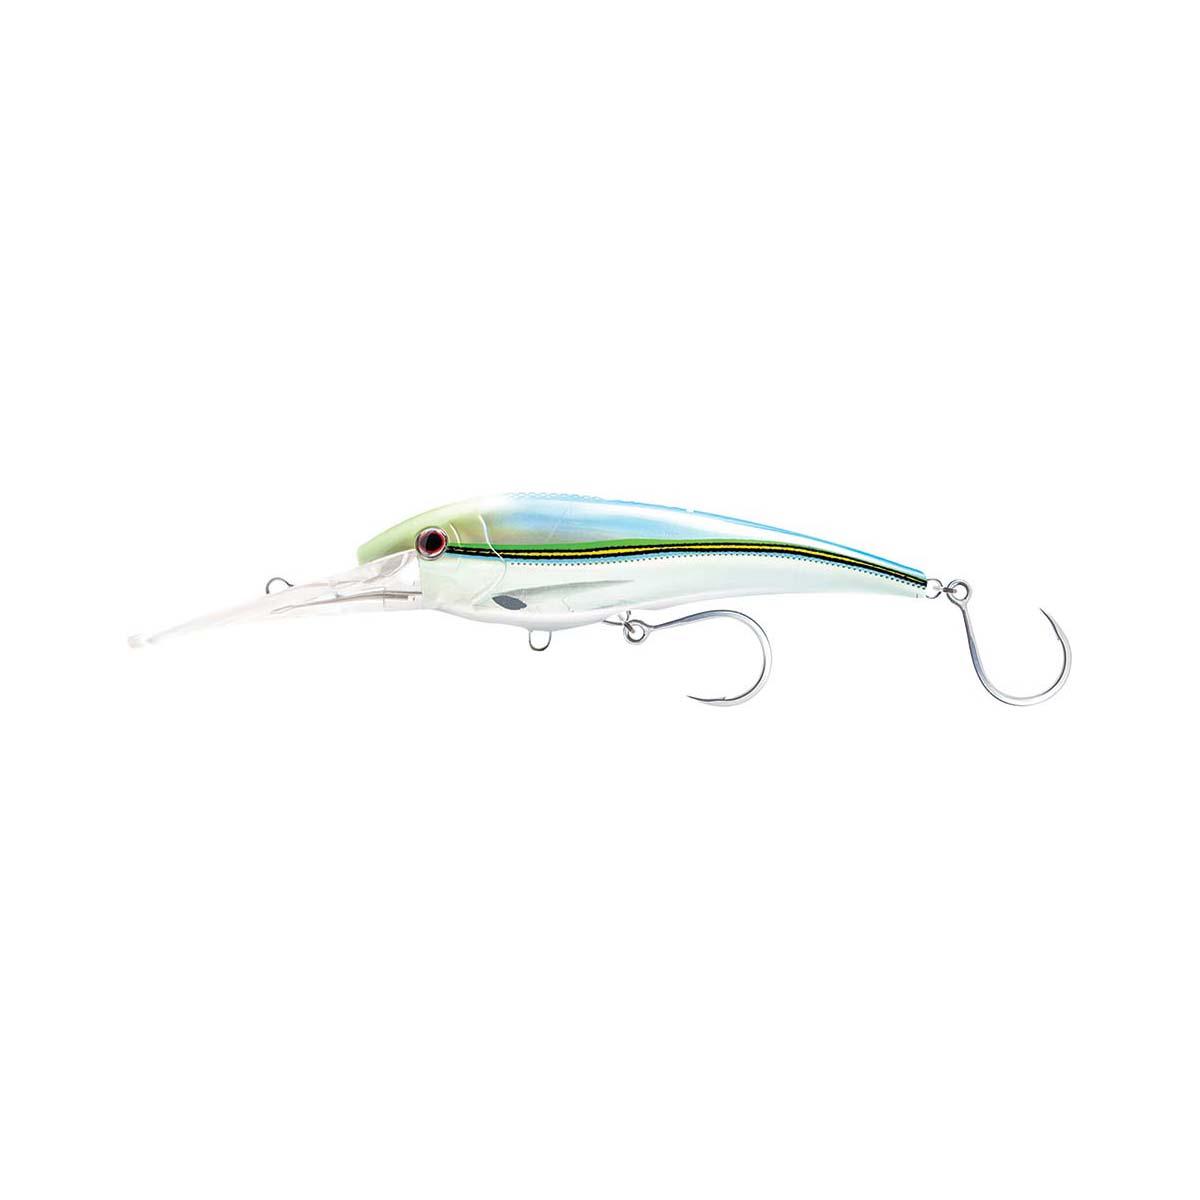 Nomad DTX Minnow Hard Body Lure 16.5cm S Fusilier @ Club BCF